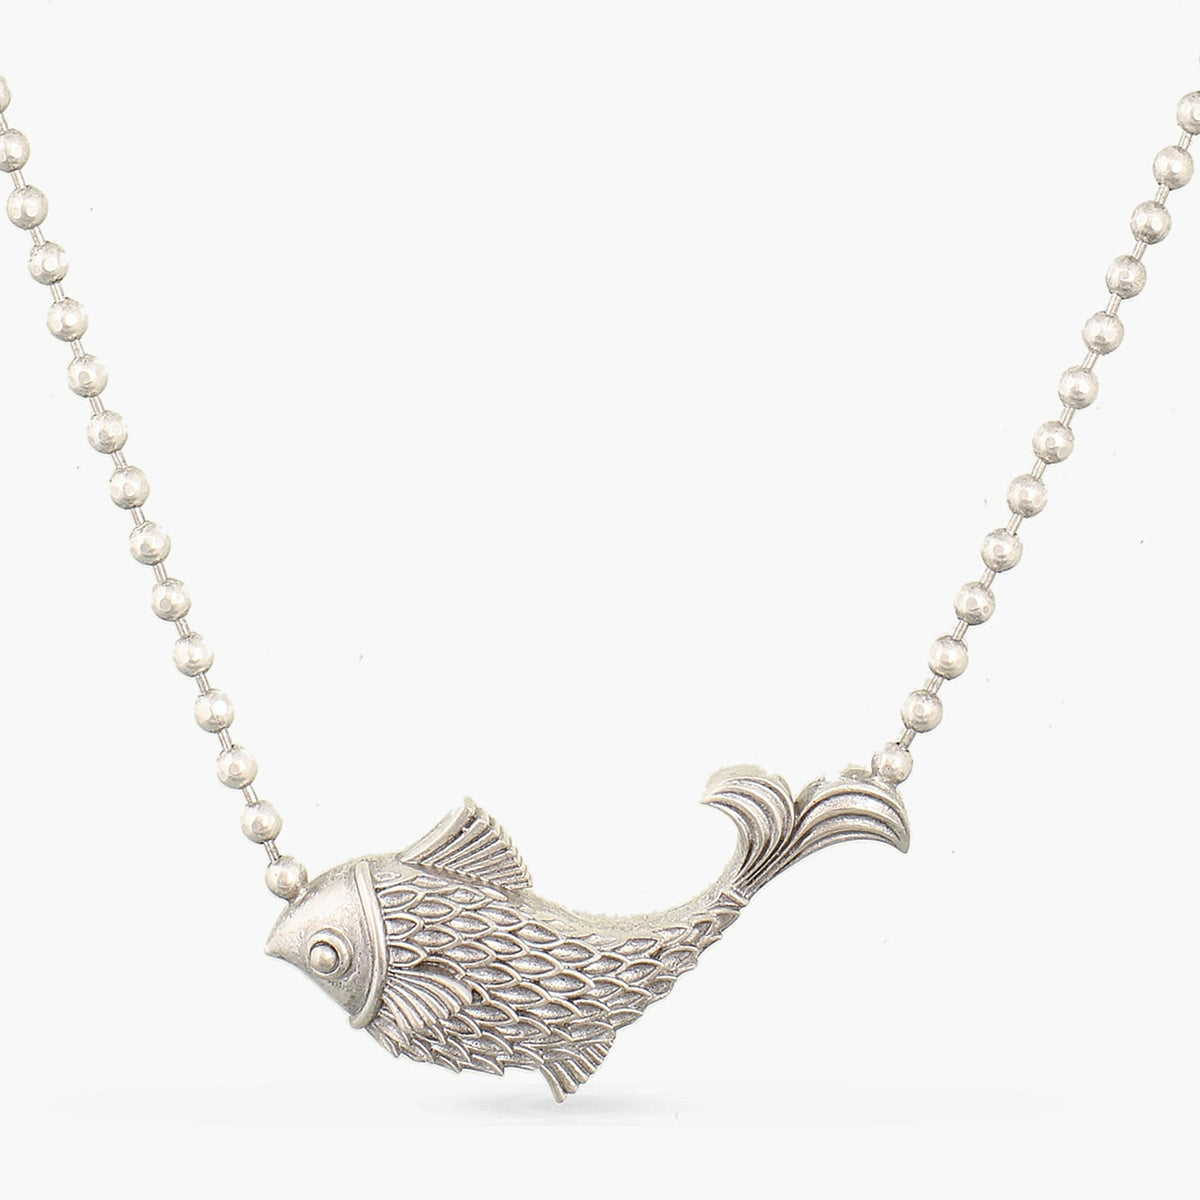 Fish Oxidized Beads Chain Necklace